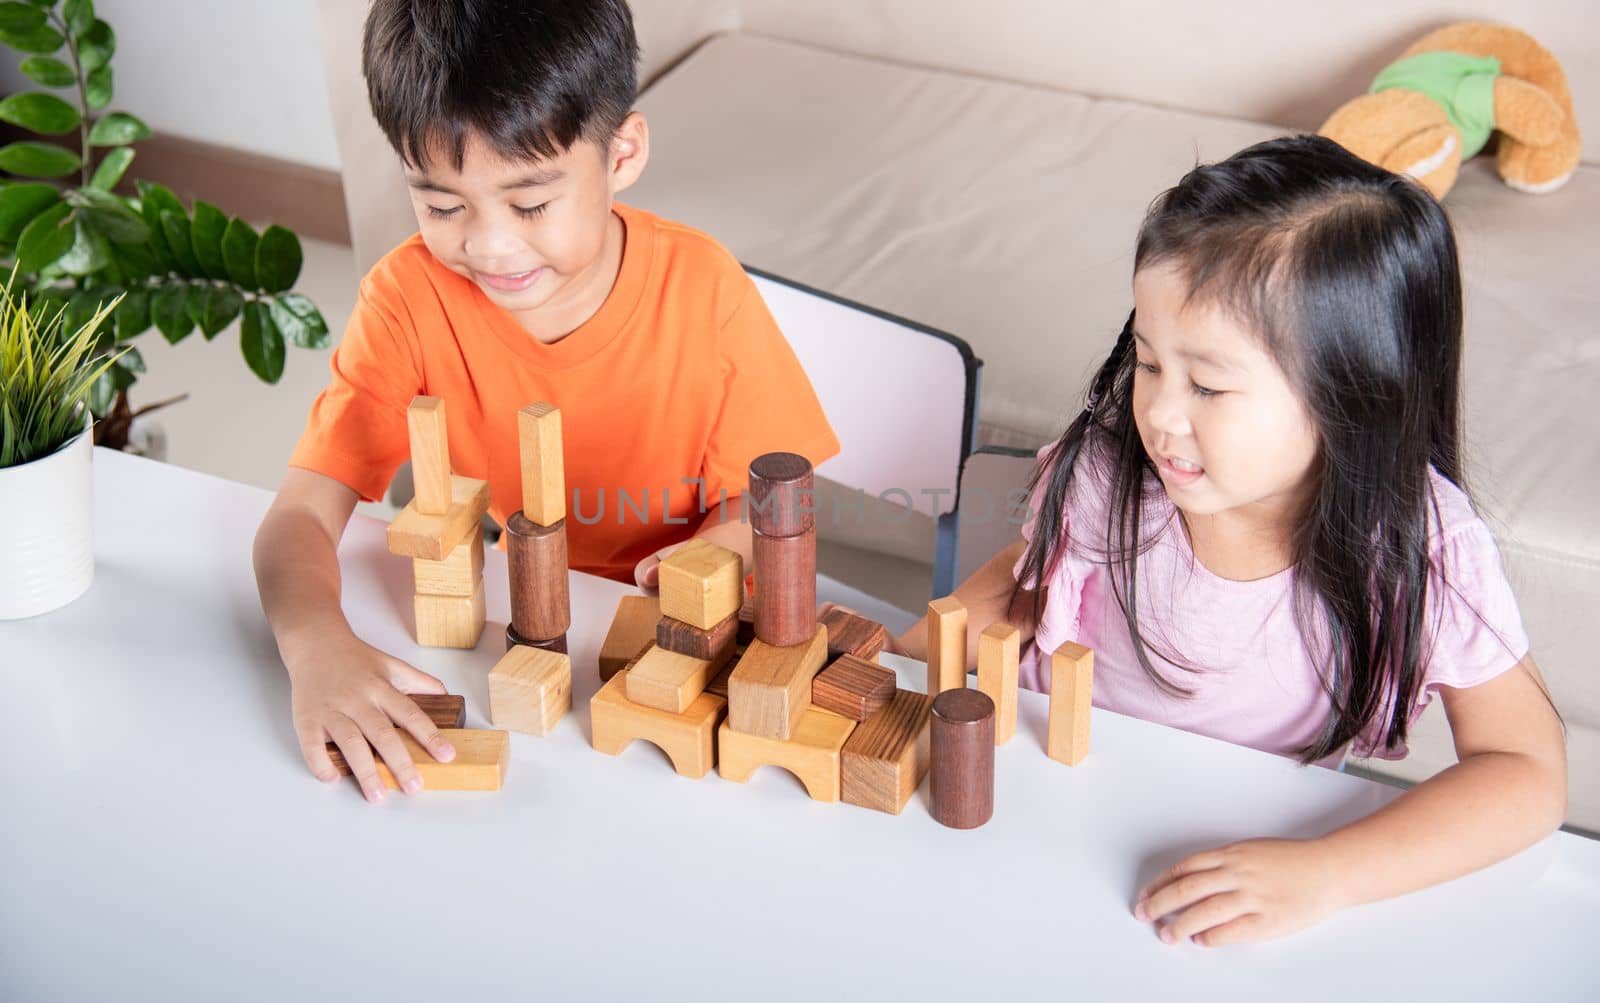 Children boy and girl playing with constructor wooden block building, Happy little kids play wood block stacking board game at home, activities learning creative, toys for preschool and kindergarten